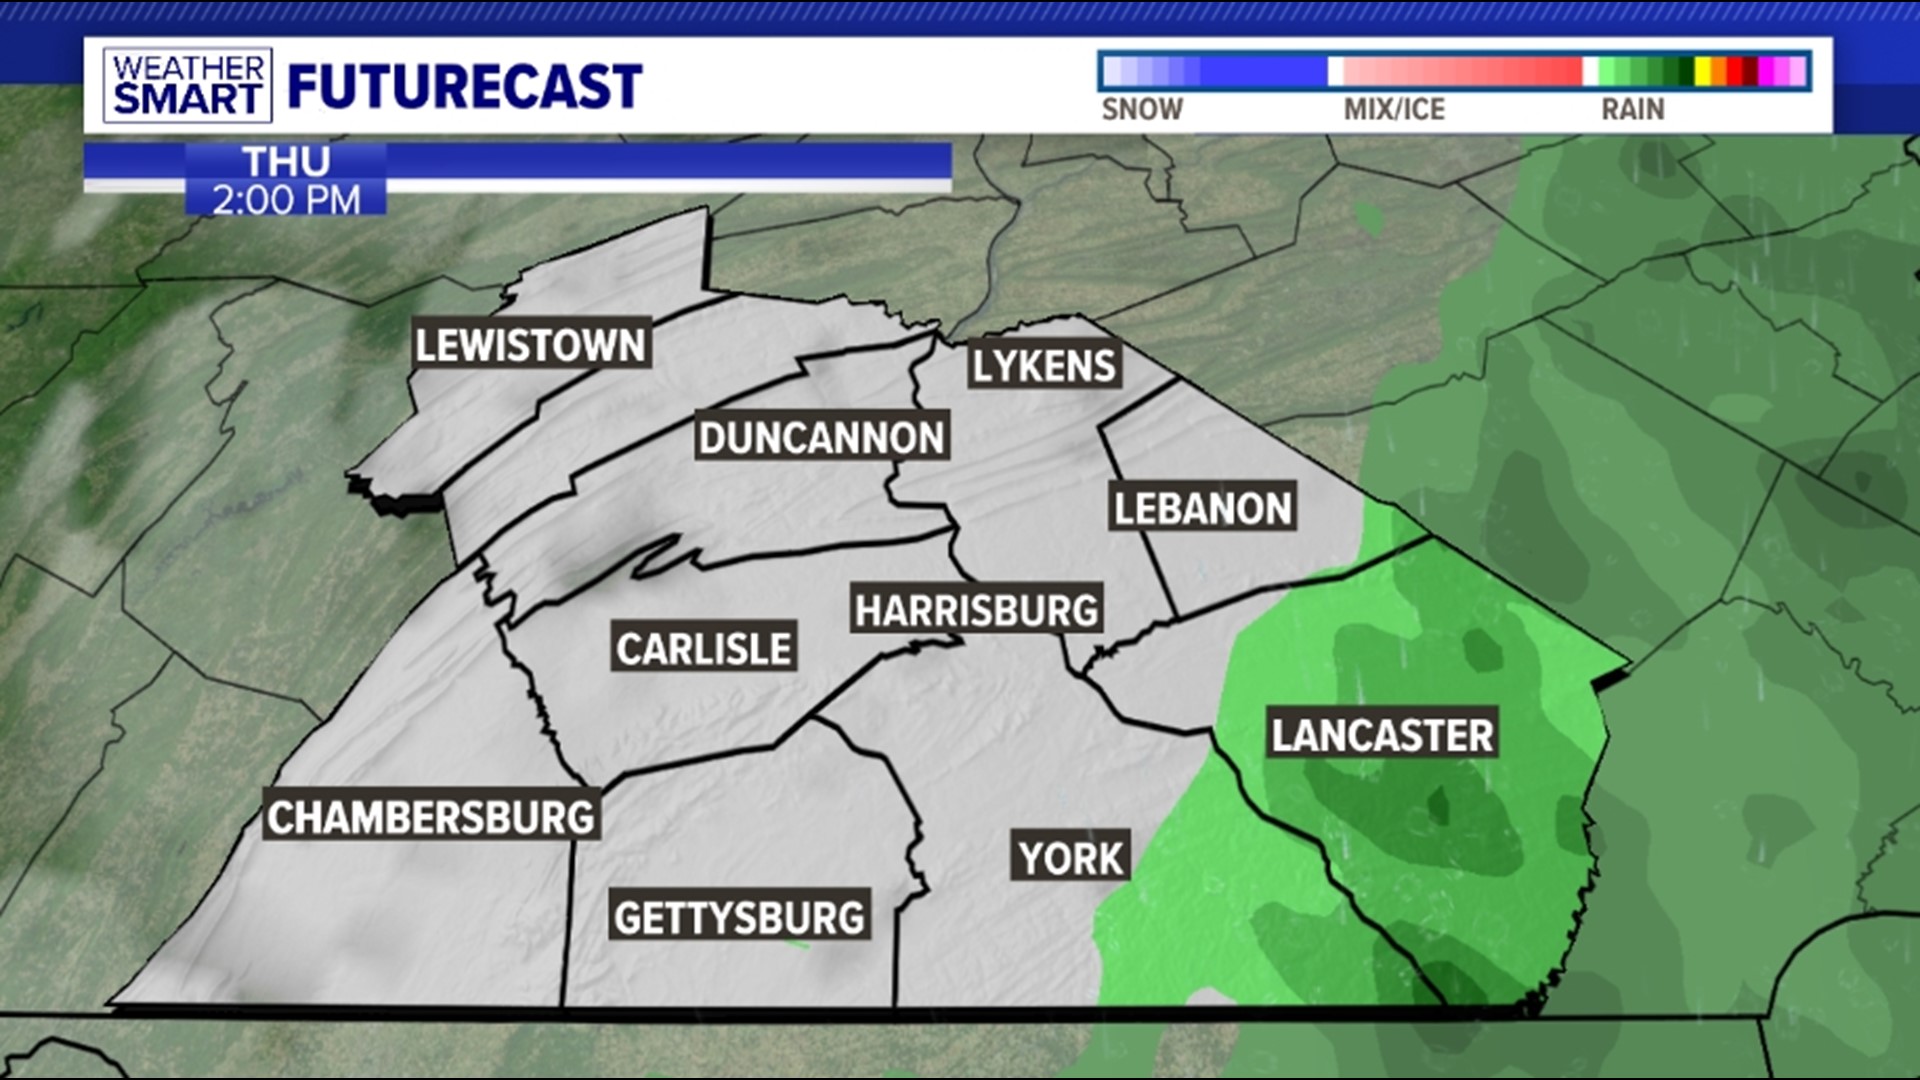 Any lingering showers today will be light and confined to areas east of Harrisburg. Winds pick up as we dry out tomorrow!